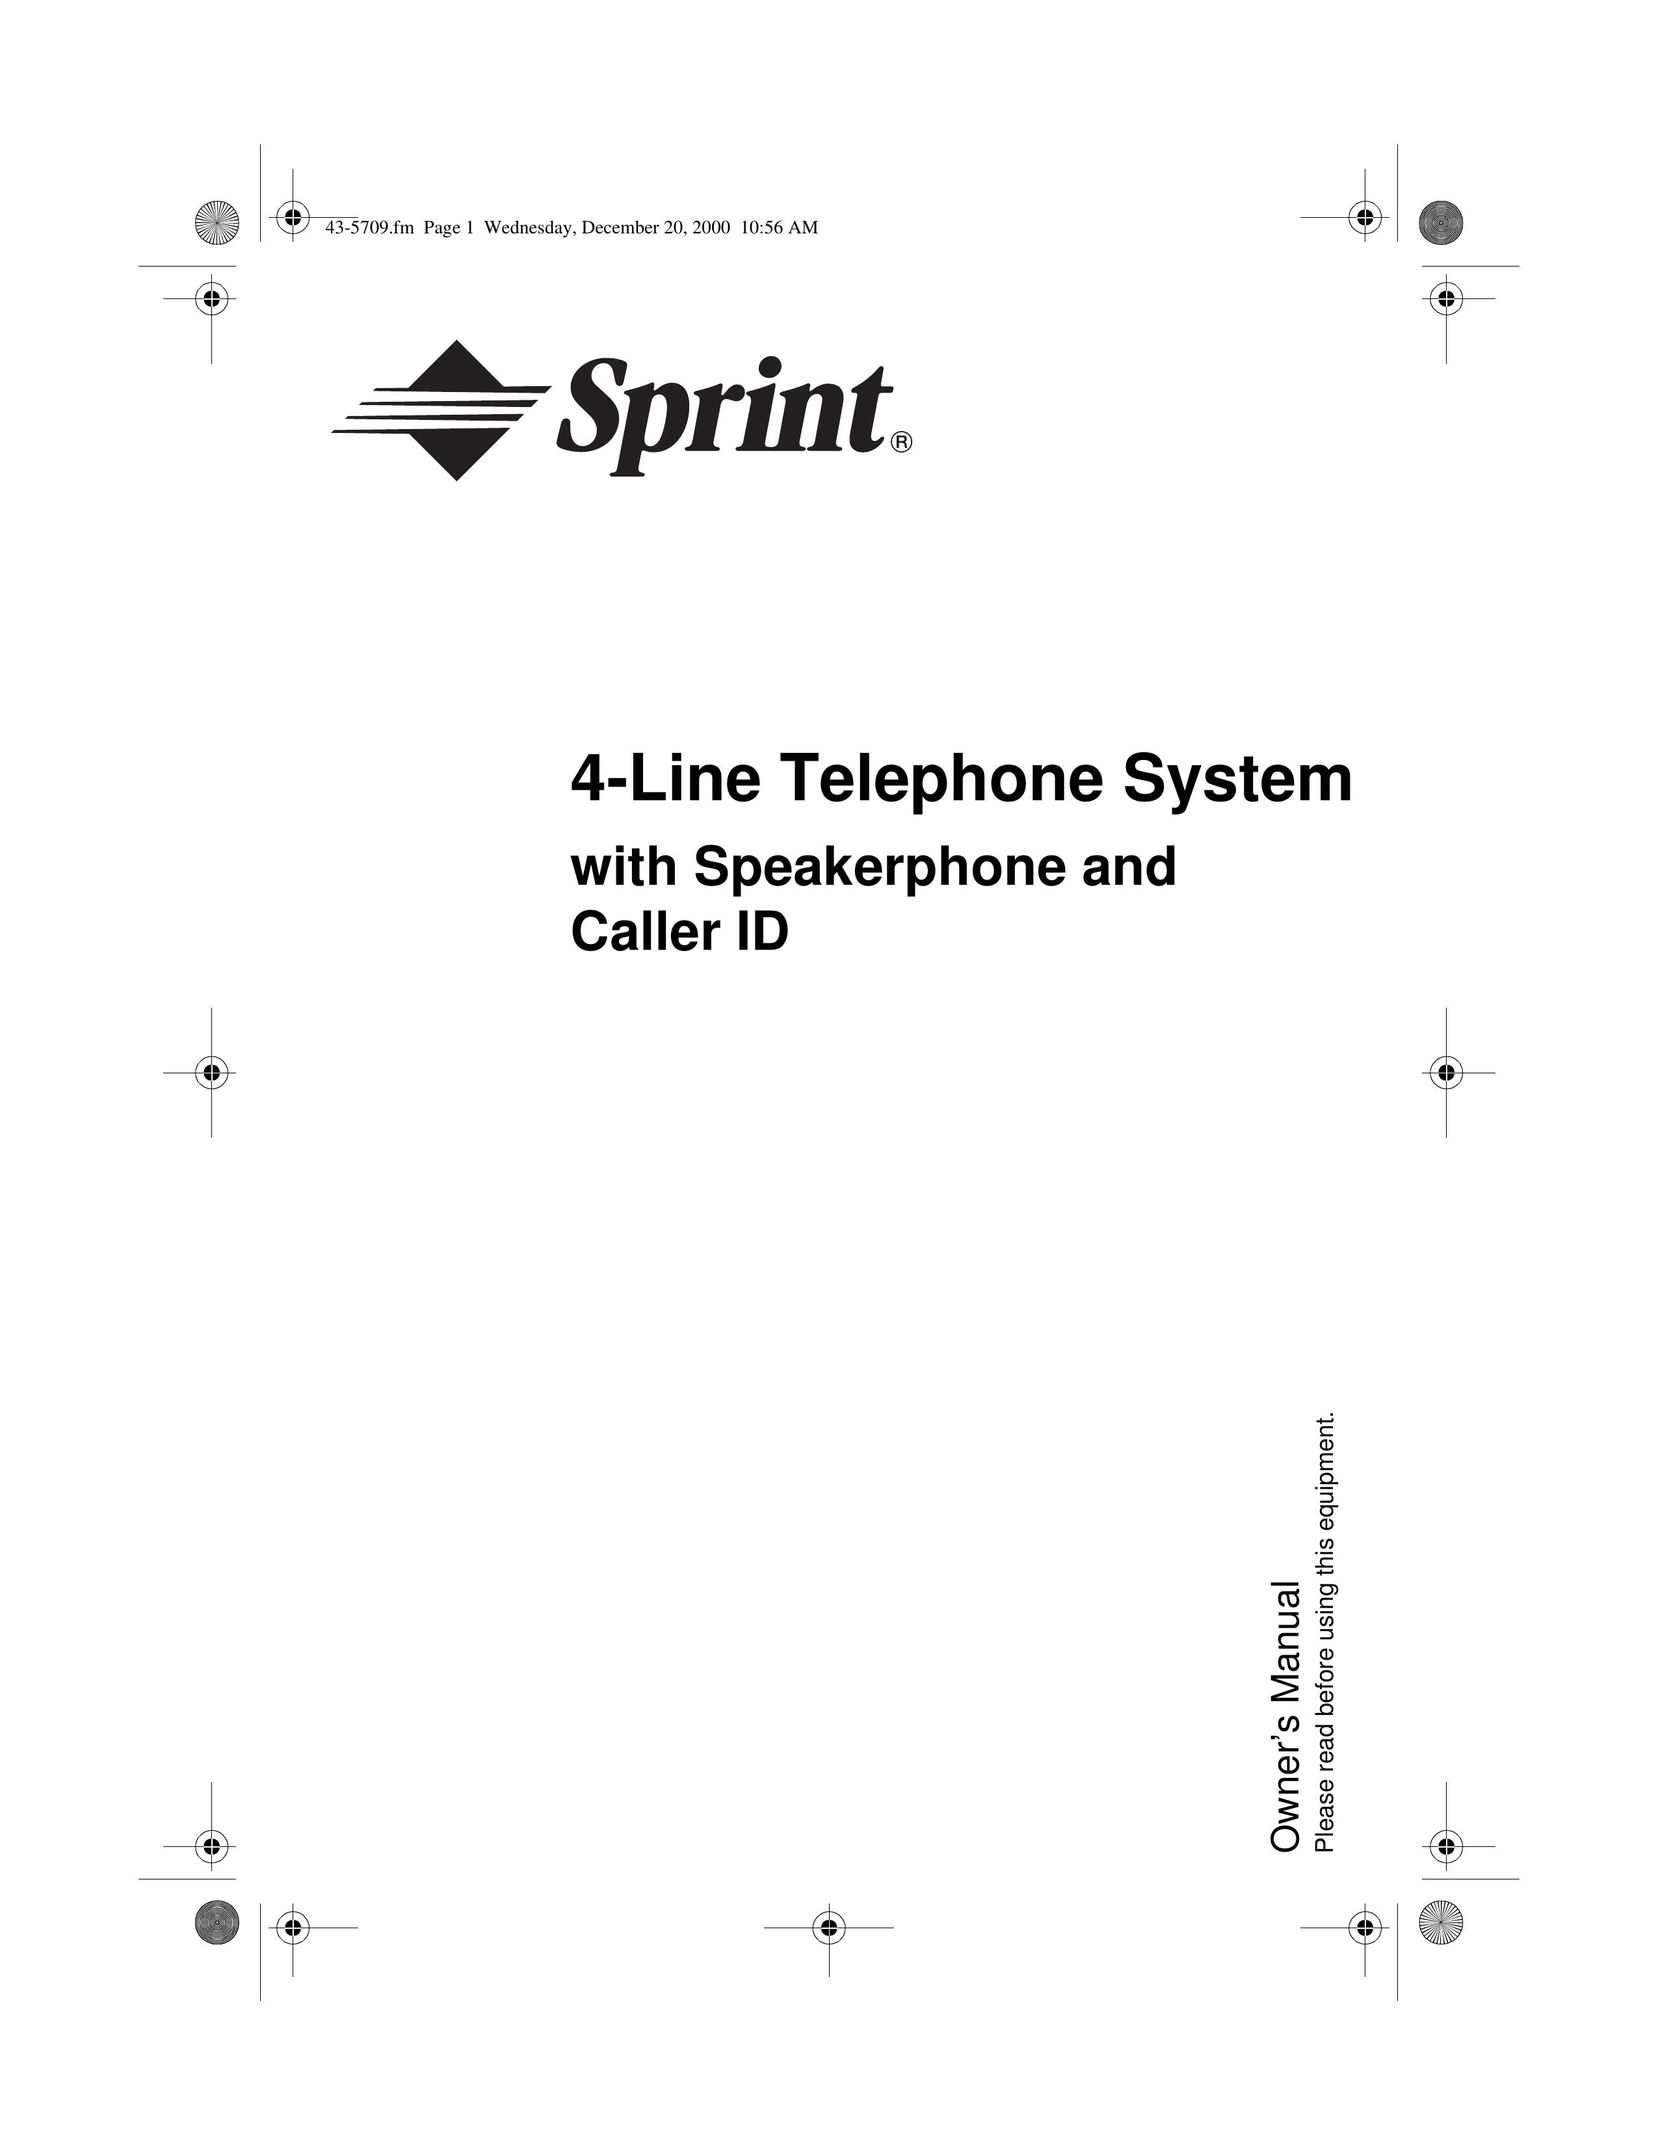 Radio Shack 4-Line Telephone System with Speakerphone and Caller ID Telephone User Manual